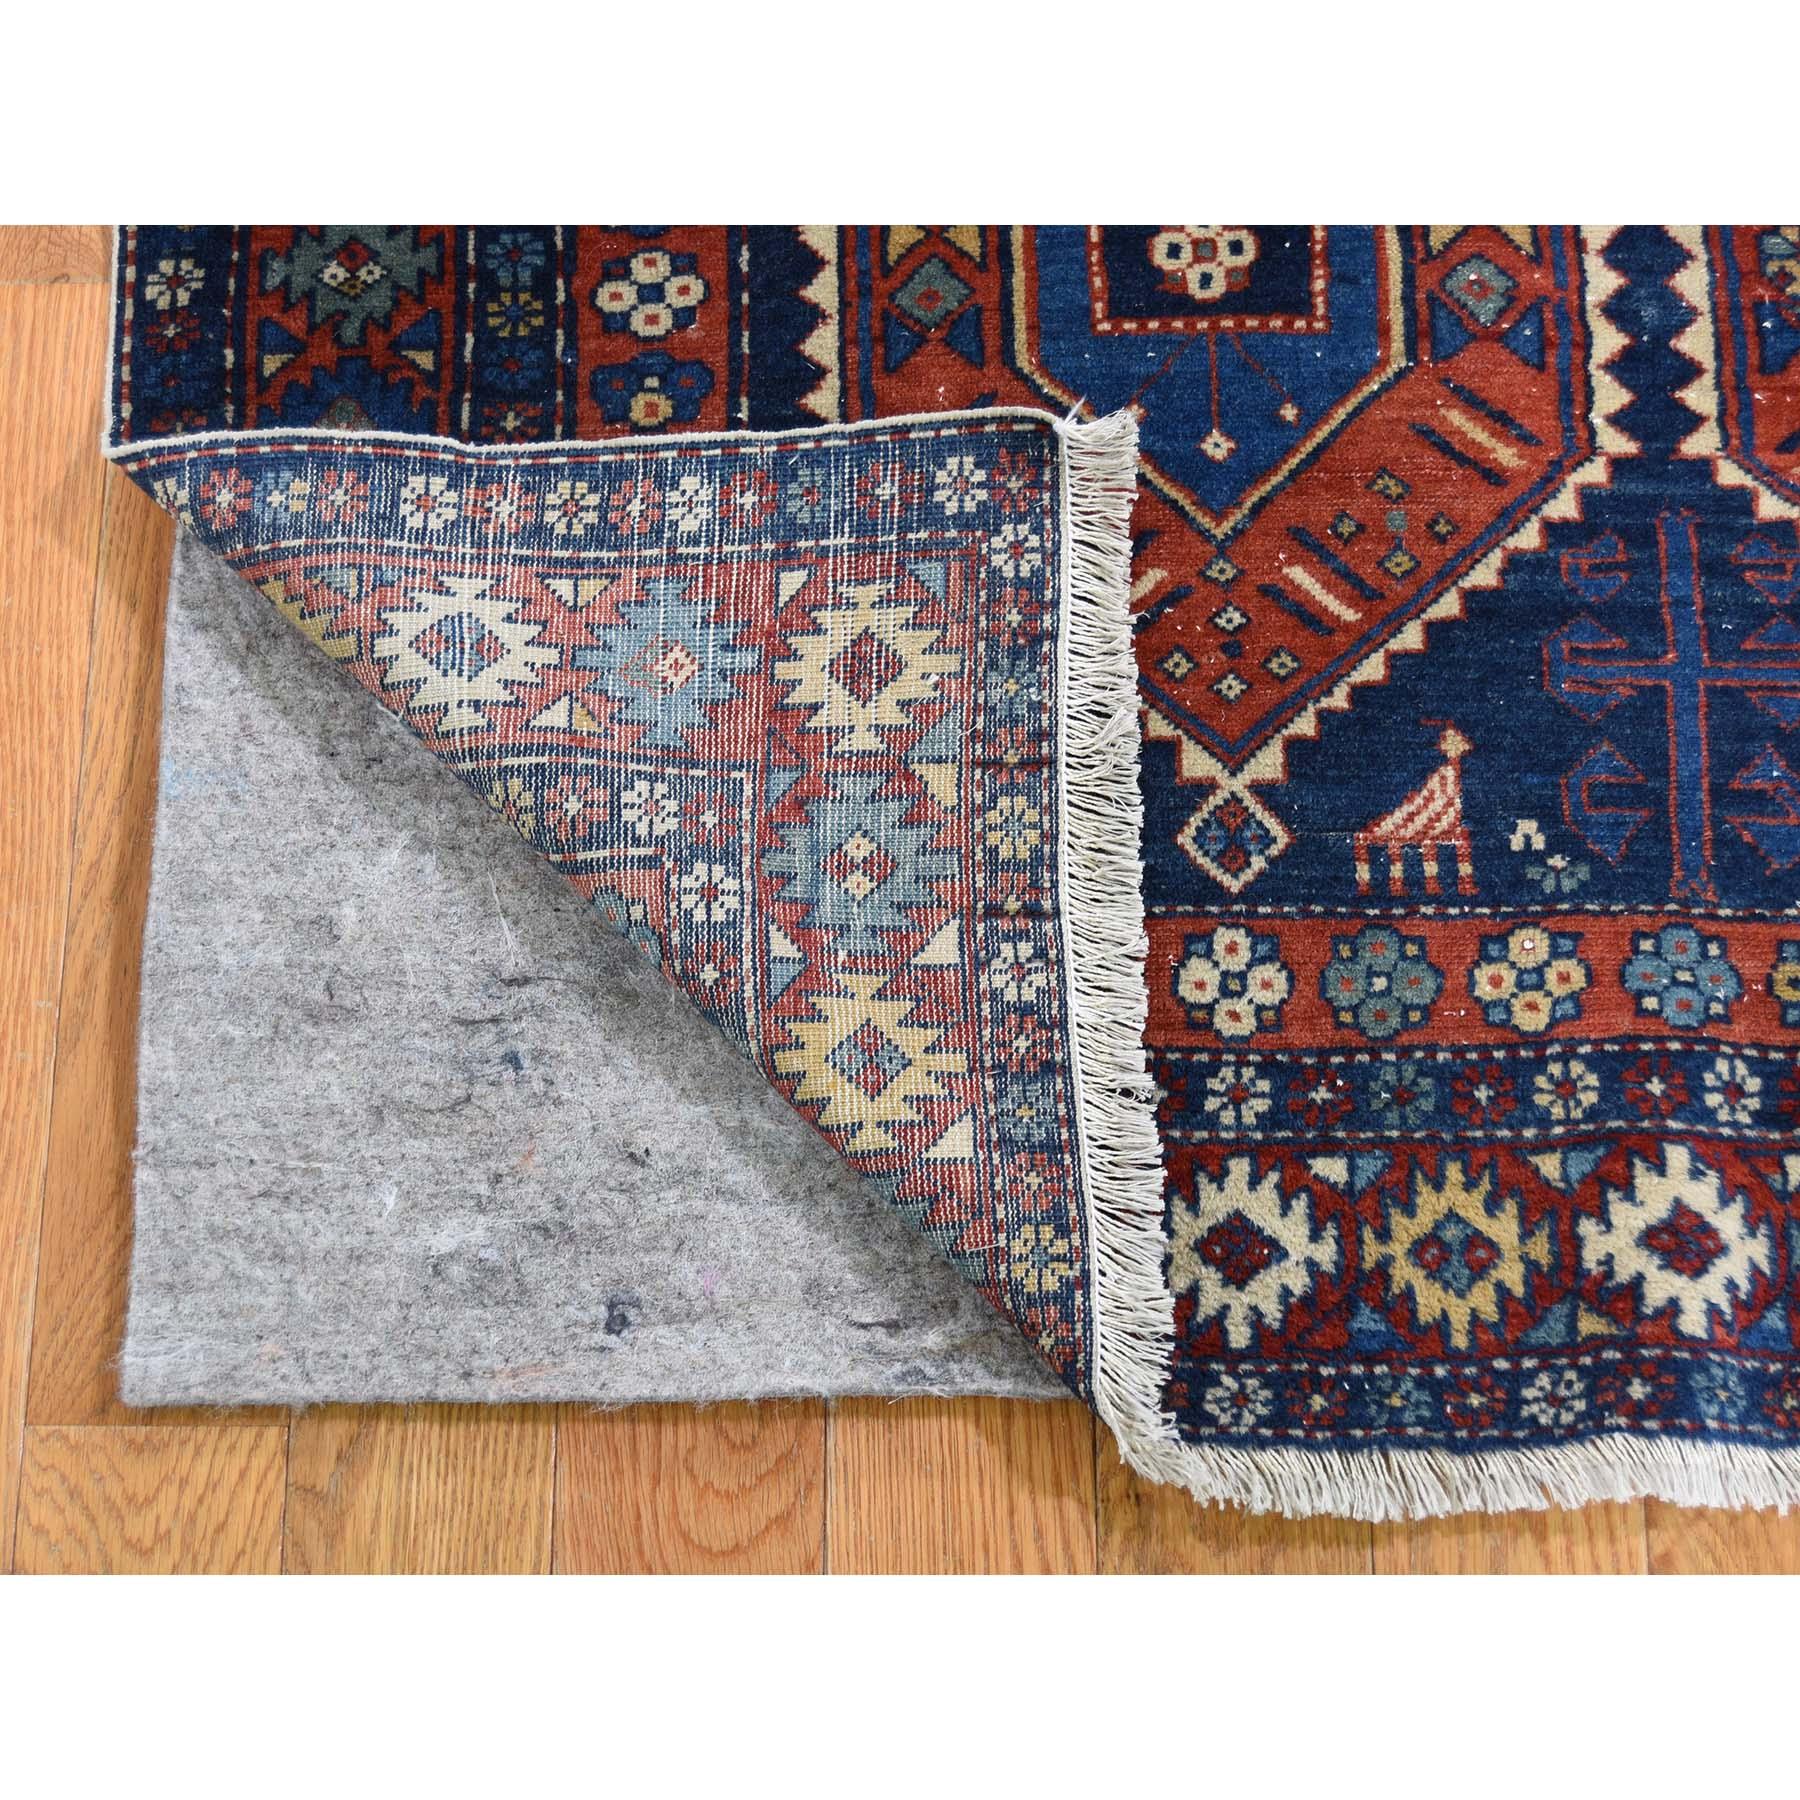 This is a truly genuine one-of-a-kind navy antique Persian Ardabil clean even wear pure wool hand knotted rug. It has been knotted for months and months in the centuries-old Persian weaving craftsmanship techniques by expert artisans. 


Primary